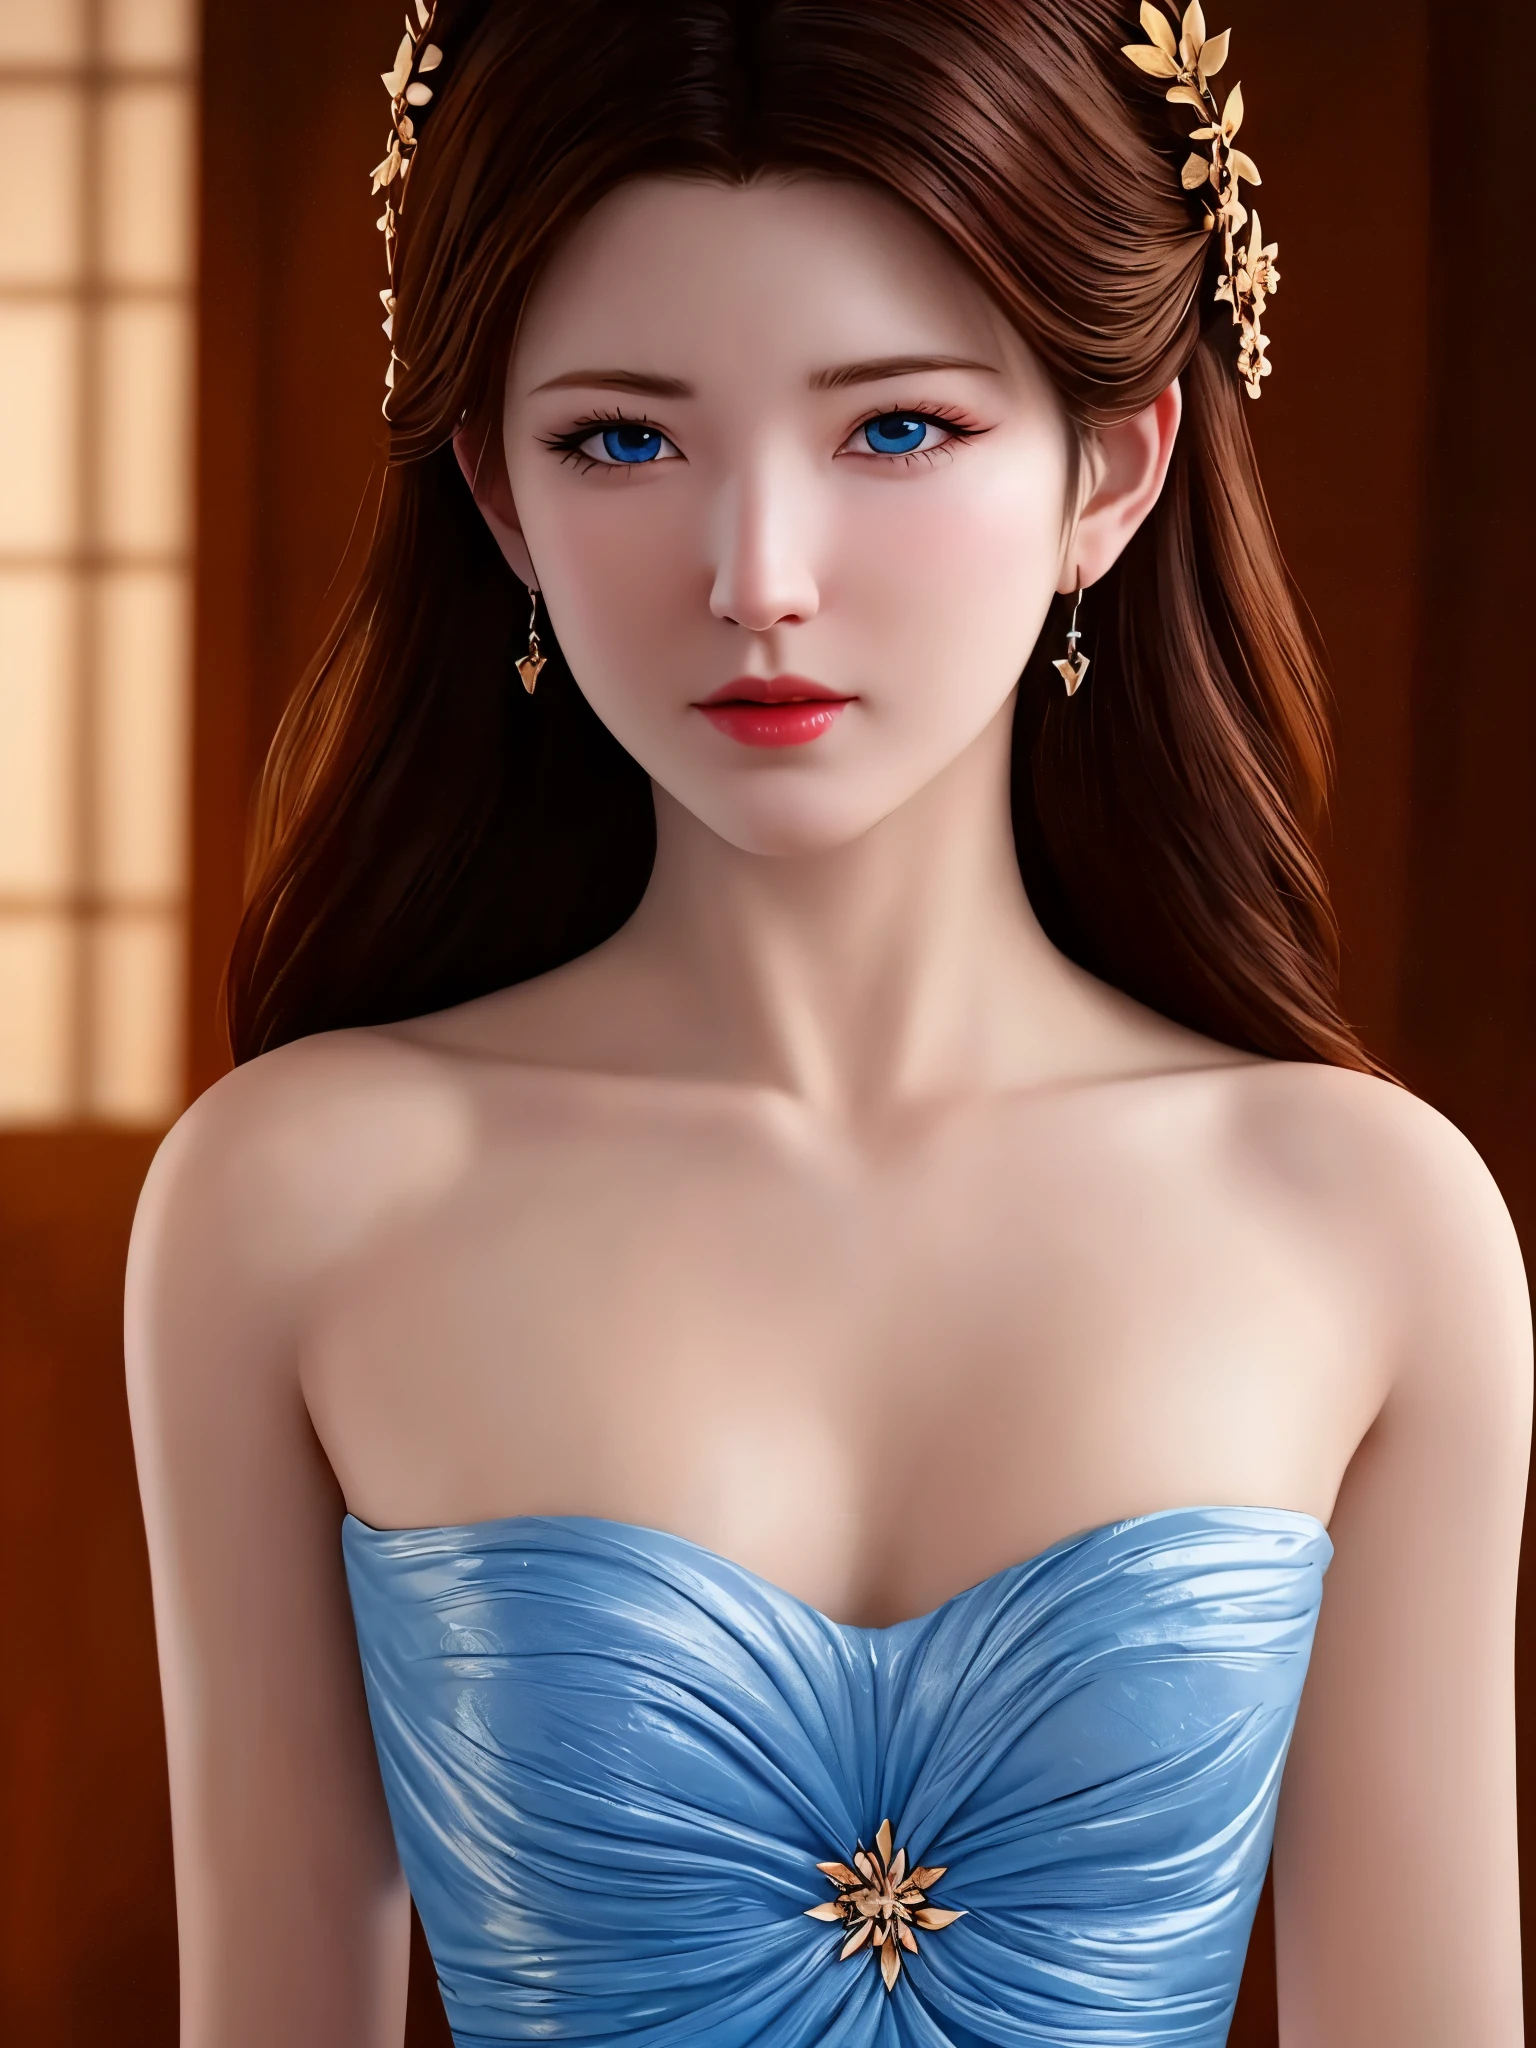 Unreal Engine 5 Realistic Rendering, detailed lips, long wavy hair, serpents for hair, fierce expression, pale complexion, mesmerizing gaze, mythical creature, dark and mysterious background, artistic oil painting style, vibrant colors, soft lighting, Unreal Engine 5 Realistic Rendering, (hyperrealistic), (illustration), (high resolution), (8K), (extremely detailed), (best illustration), (beautiful detailed eyes), (best quality), (ultra-detailed), (masterpiece), (wallpaper), (photorealistic), (natural light), (rim lighting), (detailed face), (high detailed realistic skin texture), (anatomically correct), (solo), (1 girl), (high detailed realistic hair), (caramel hair:1.35), (heterochromic eyes), (detailed eyes), (blue eyes:1.37), (sparkling eyes), (realistic big breasts:1.5), (long legs), (slender abs), (dynamic pose), (closed tiny mouth:1.3), (concentrated expression), upon body